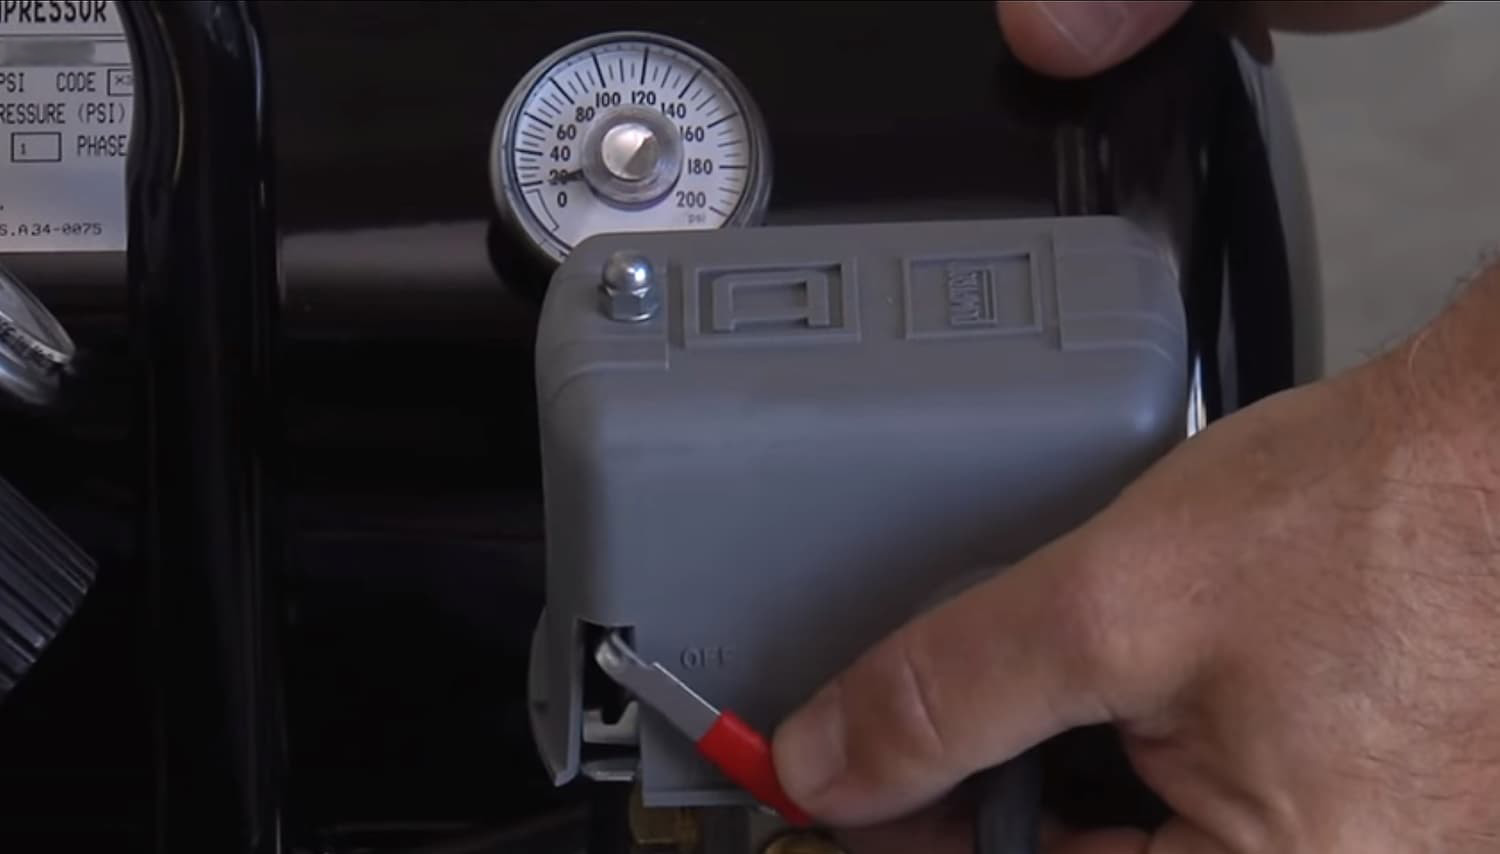 Move the lever on the pressure switch box to the "AUTO ON" position. This will allow the air compressor to start building up pressure in the air tanks until the correct pressure is achieved.